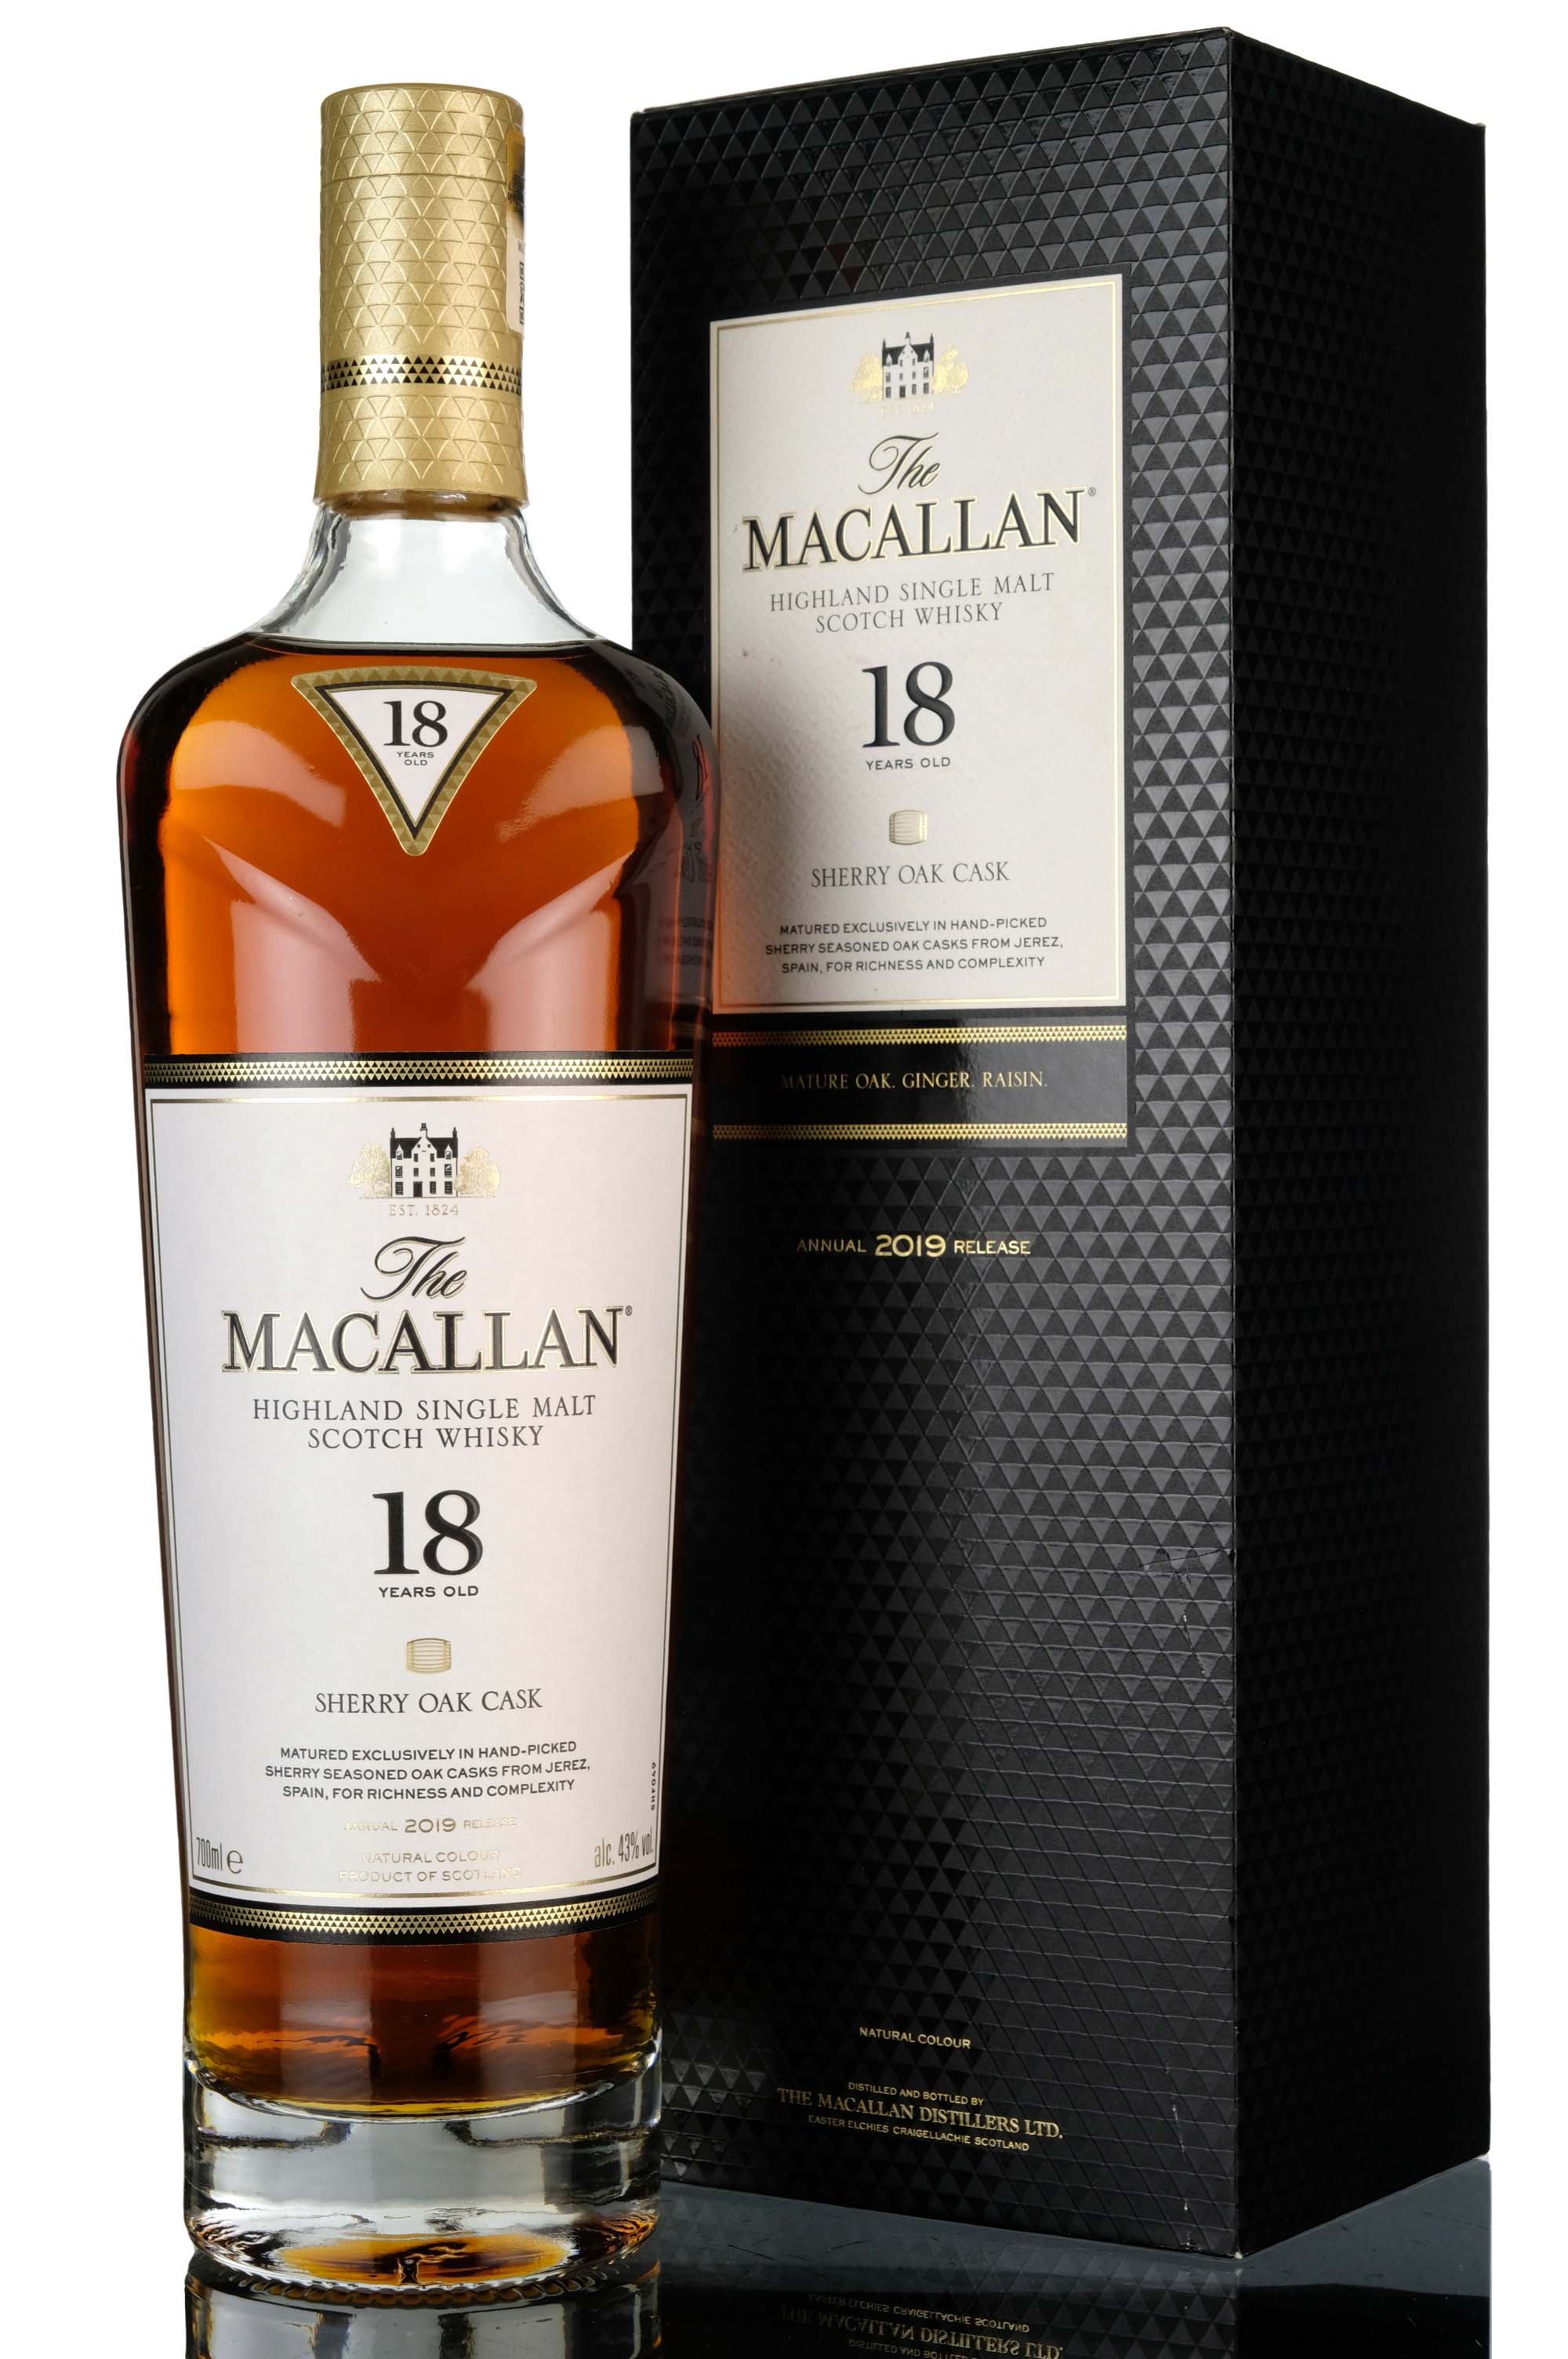 Macallan 18 Year Old - Sherry Cask - 2019 Release